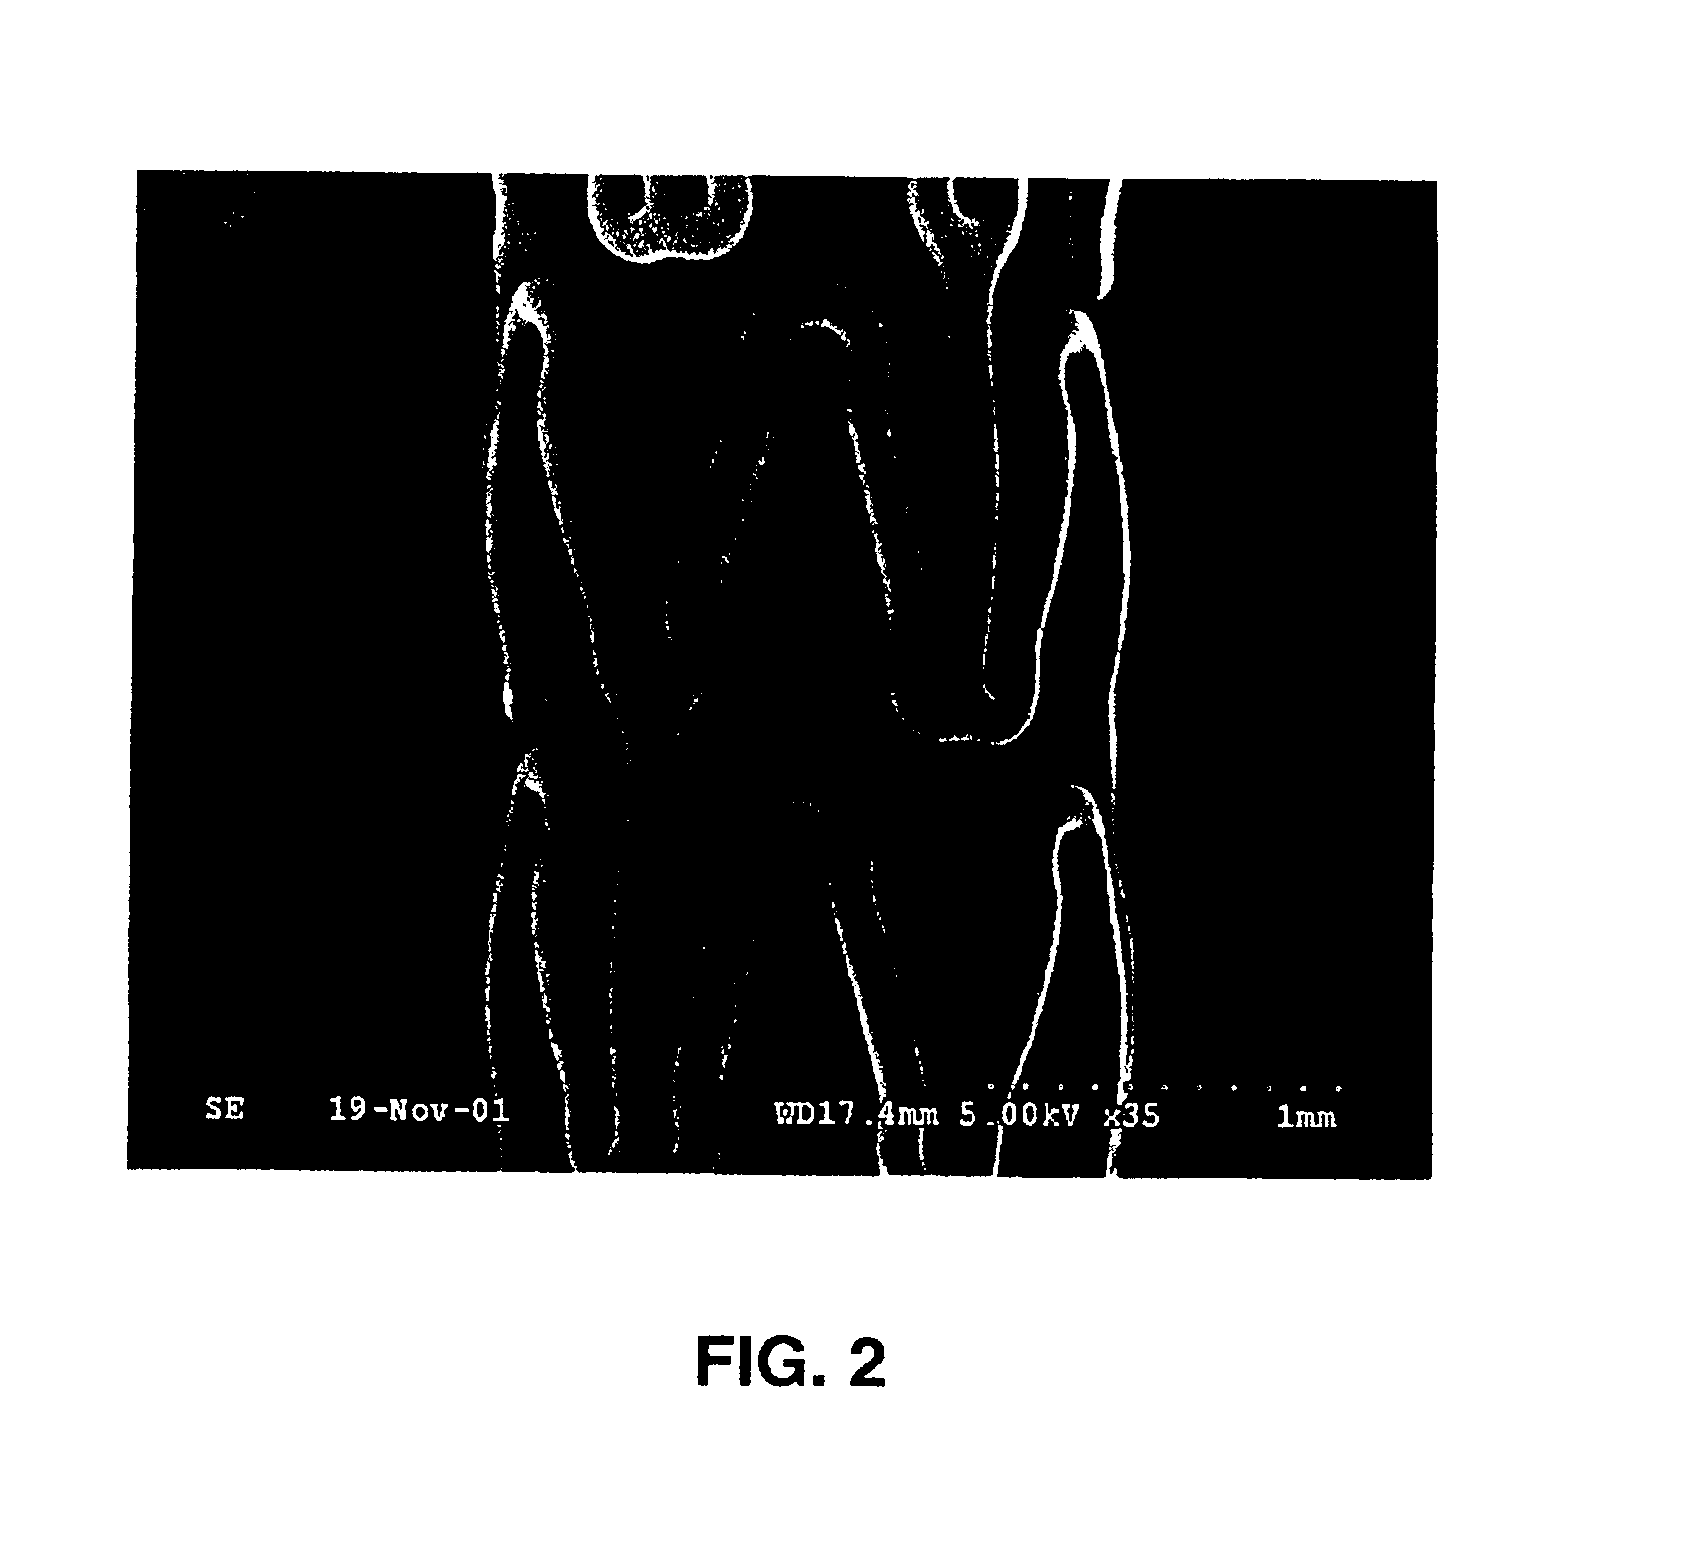 Therapeutic composition and a method of coating implantable medical devices